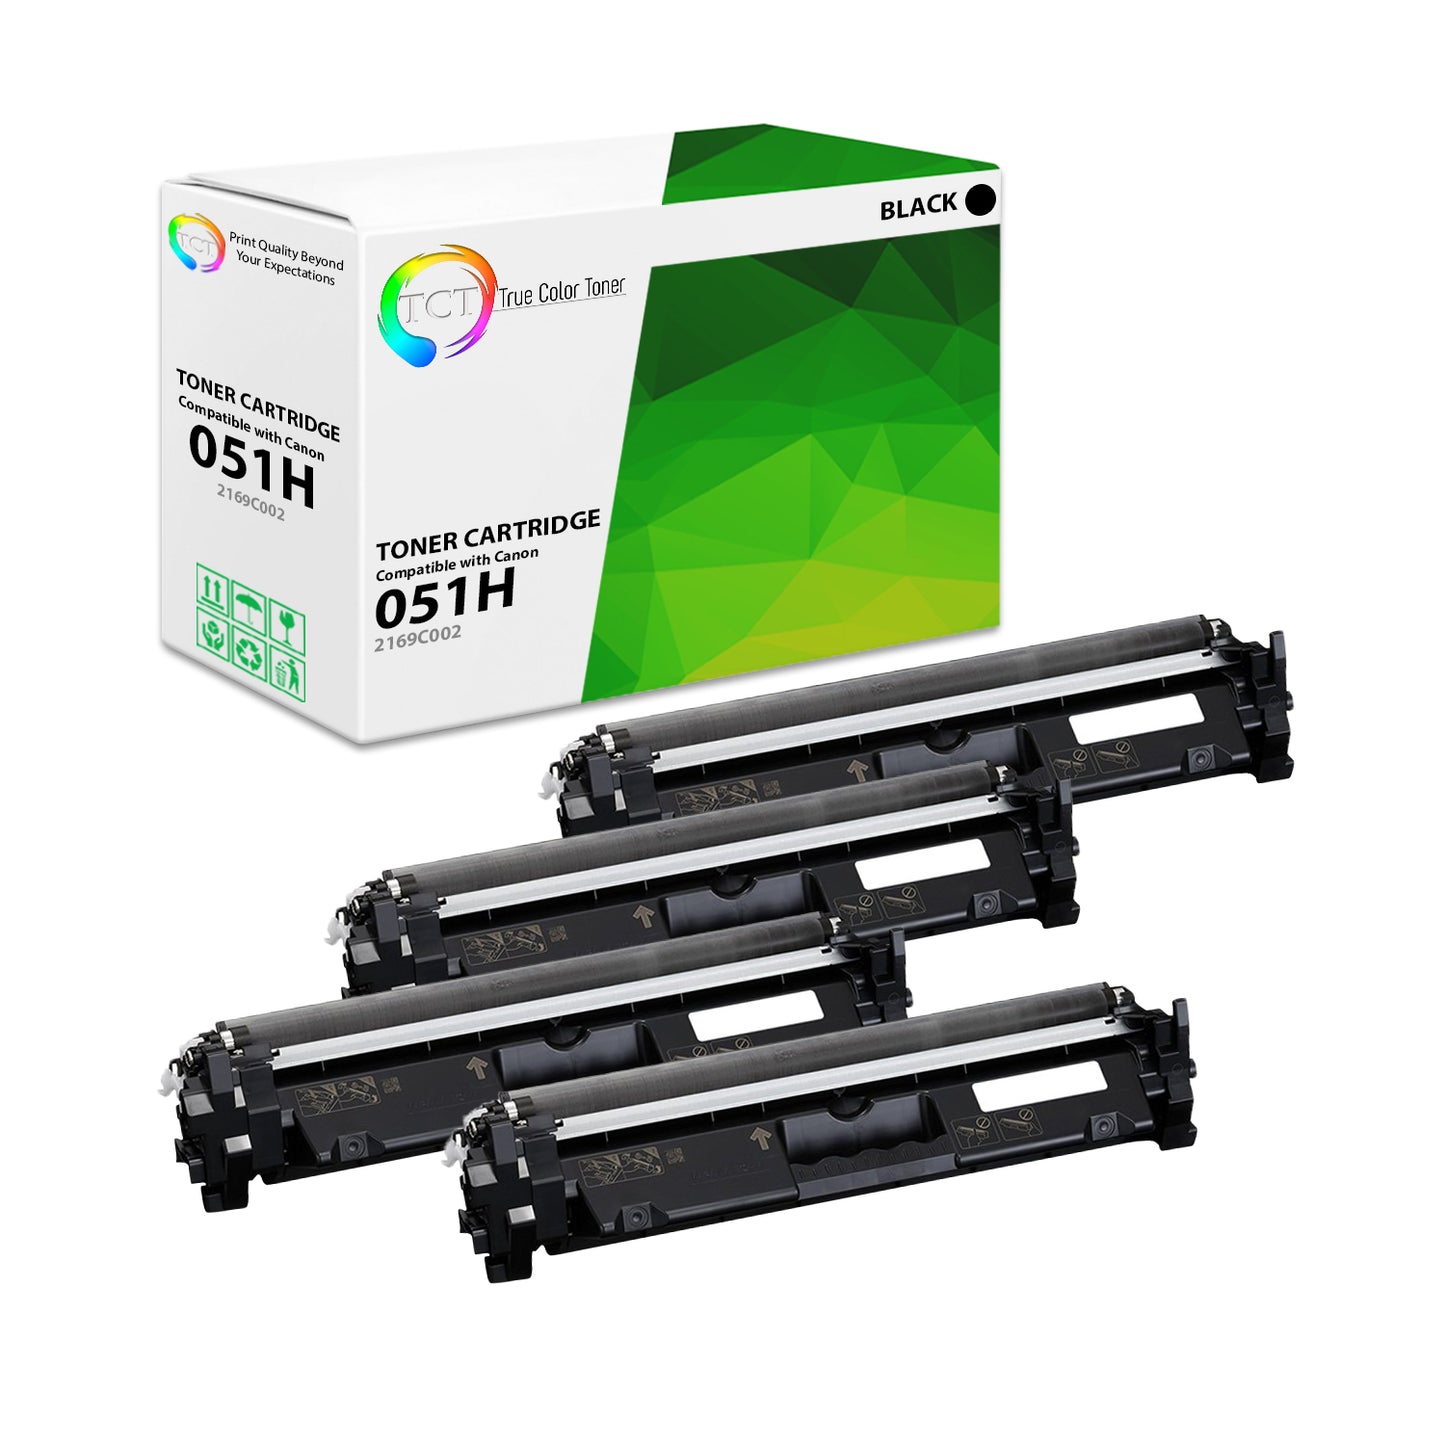 TCT Compatible High Yield Toner Cartridge Replacement for the Canon 051 Series - 4 Pack Black